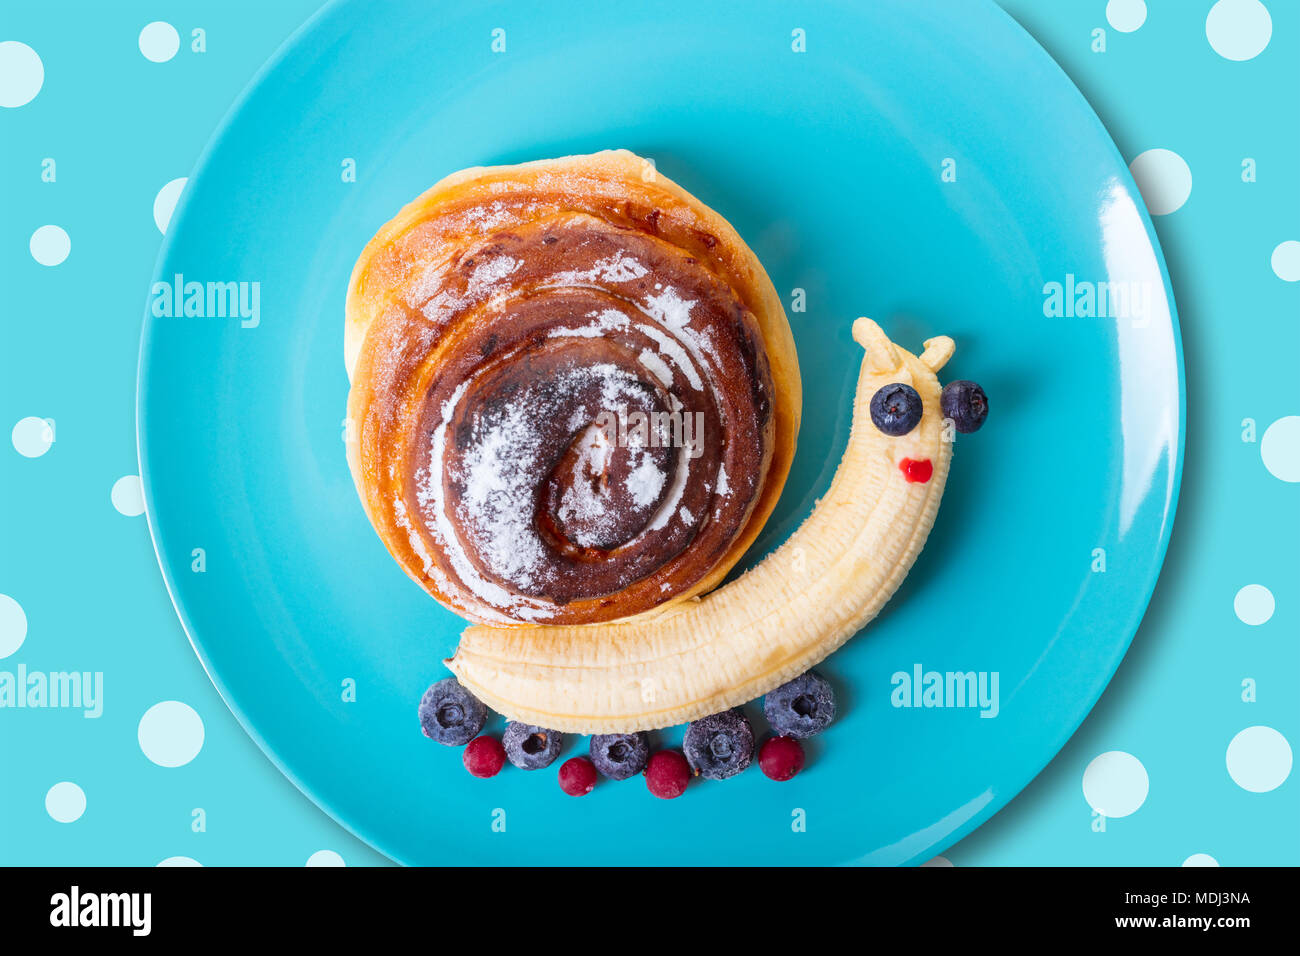 art food for children, snail from banana and bun Stock Photo